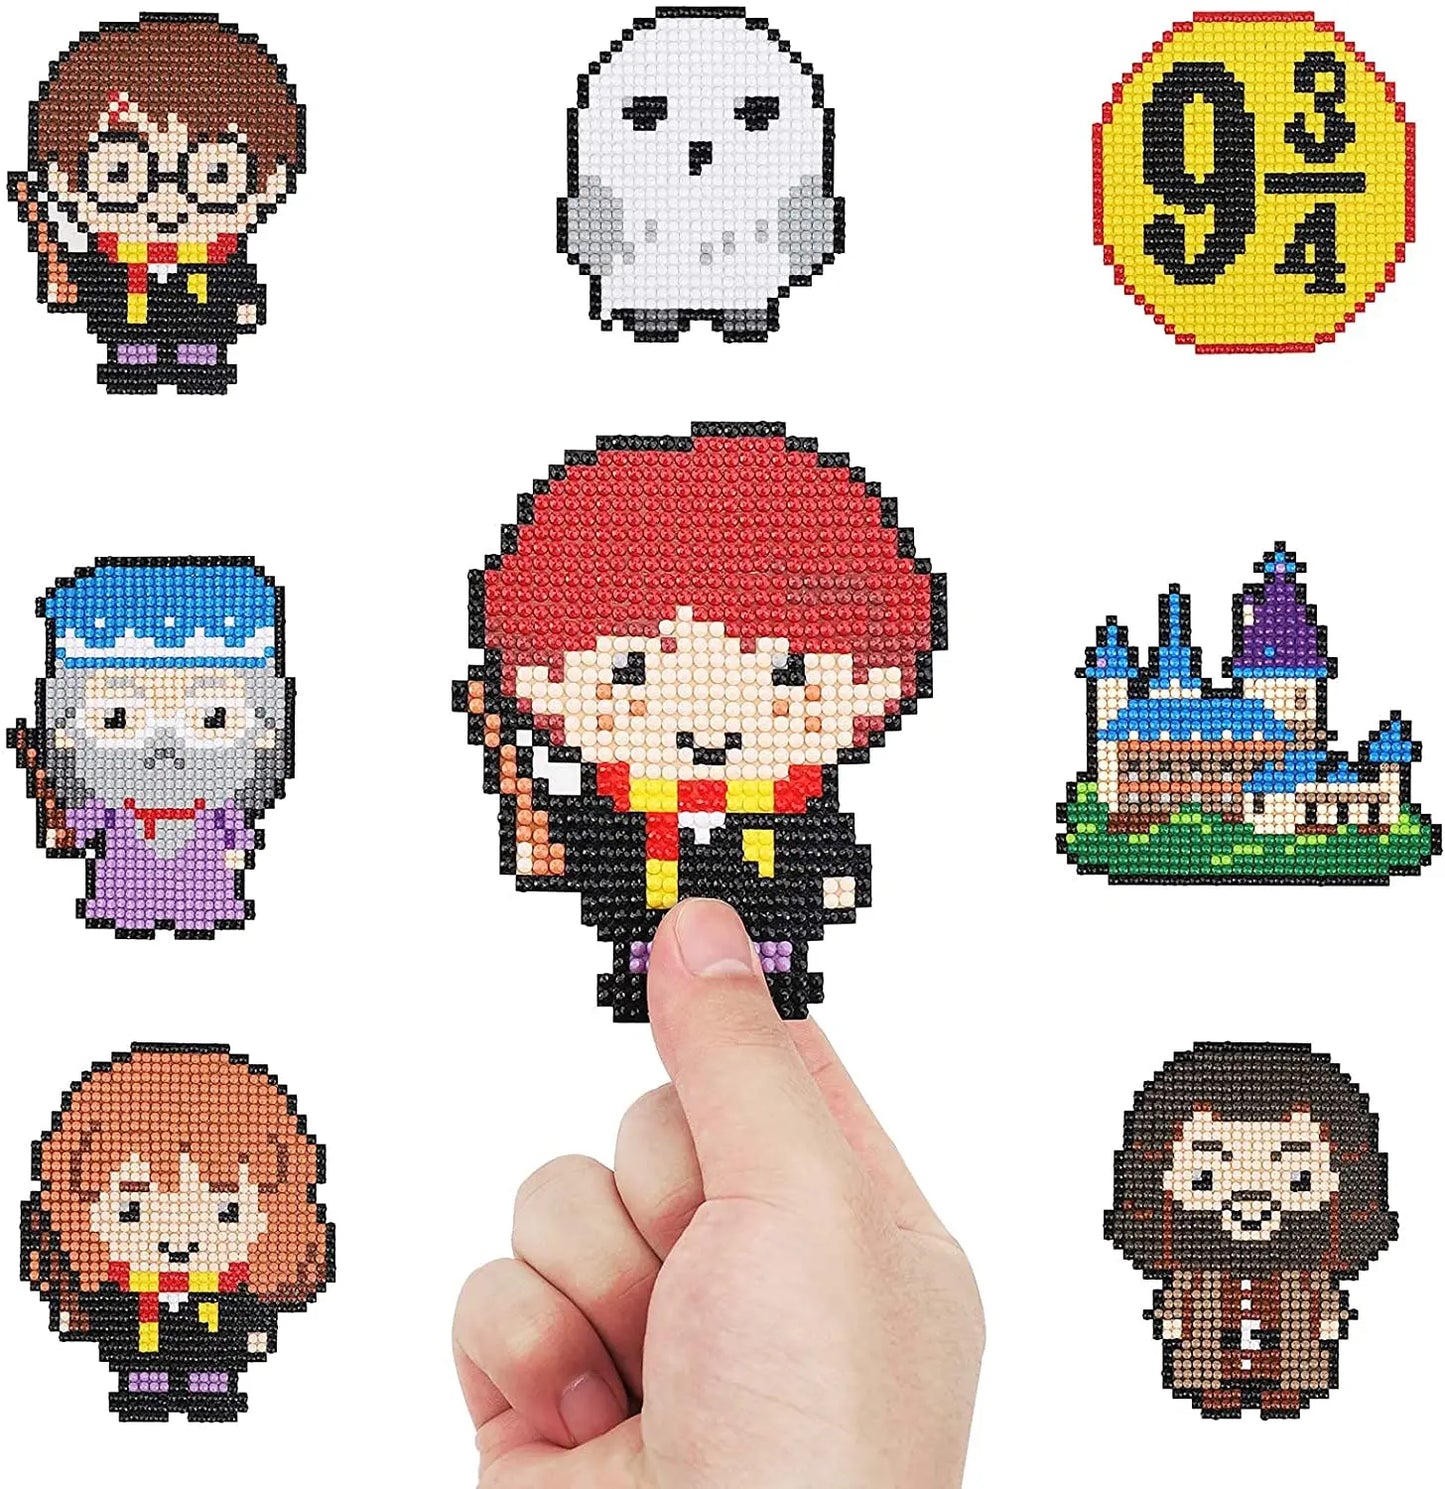 8 Pieces Cute Magic World Diamond Painting Stickers Kits for Kids, DIY 5D Wizard Diamond Art Mosaic Stickers by Numbers Kits for Children,Boys and Girls (Potter) diamondpainting